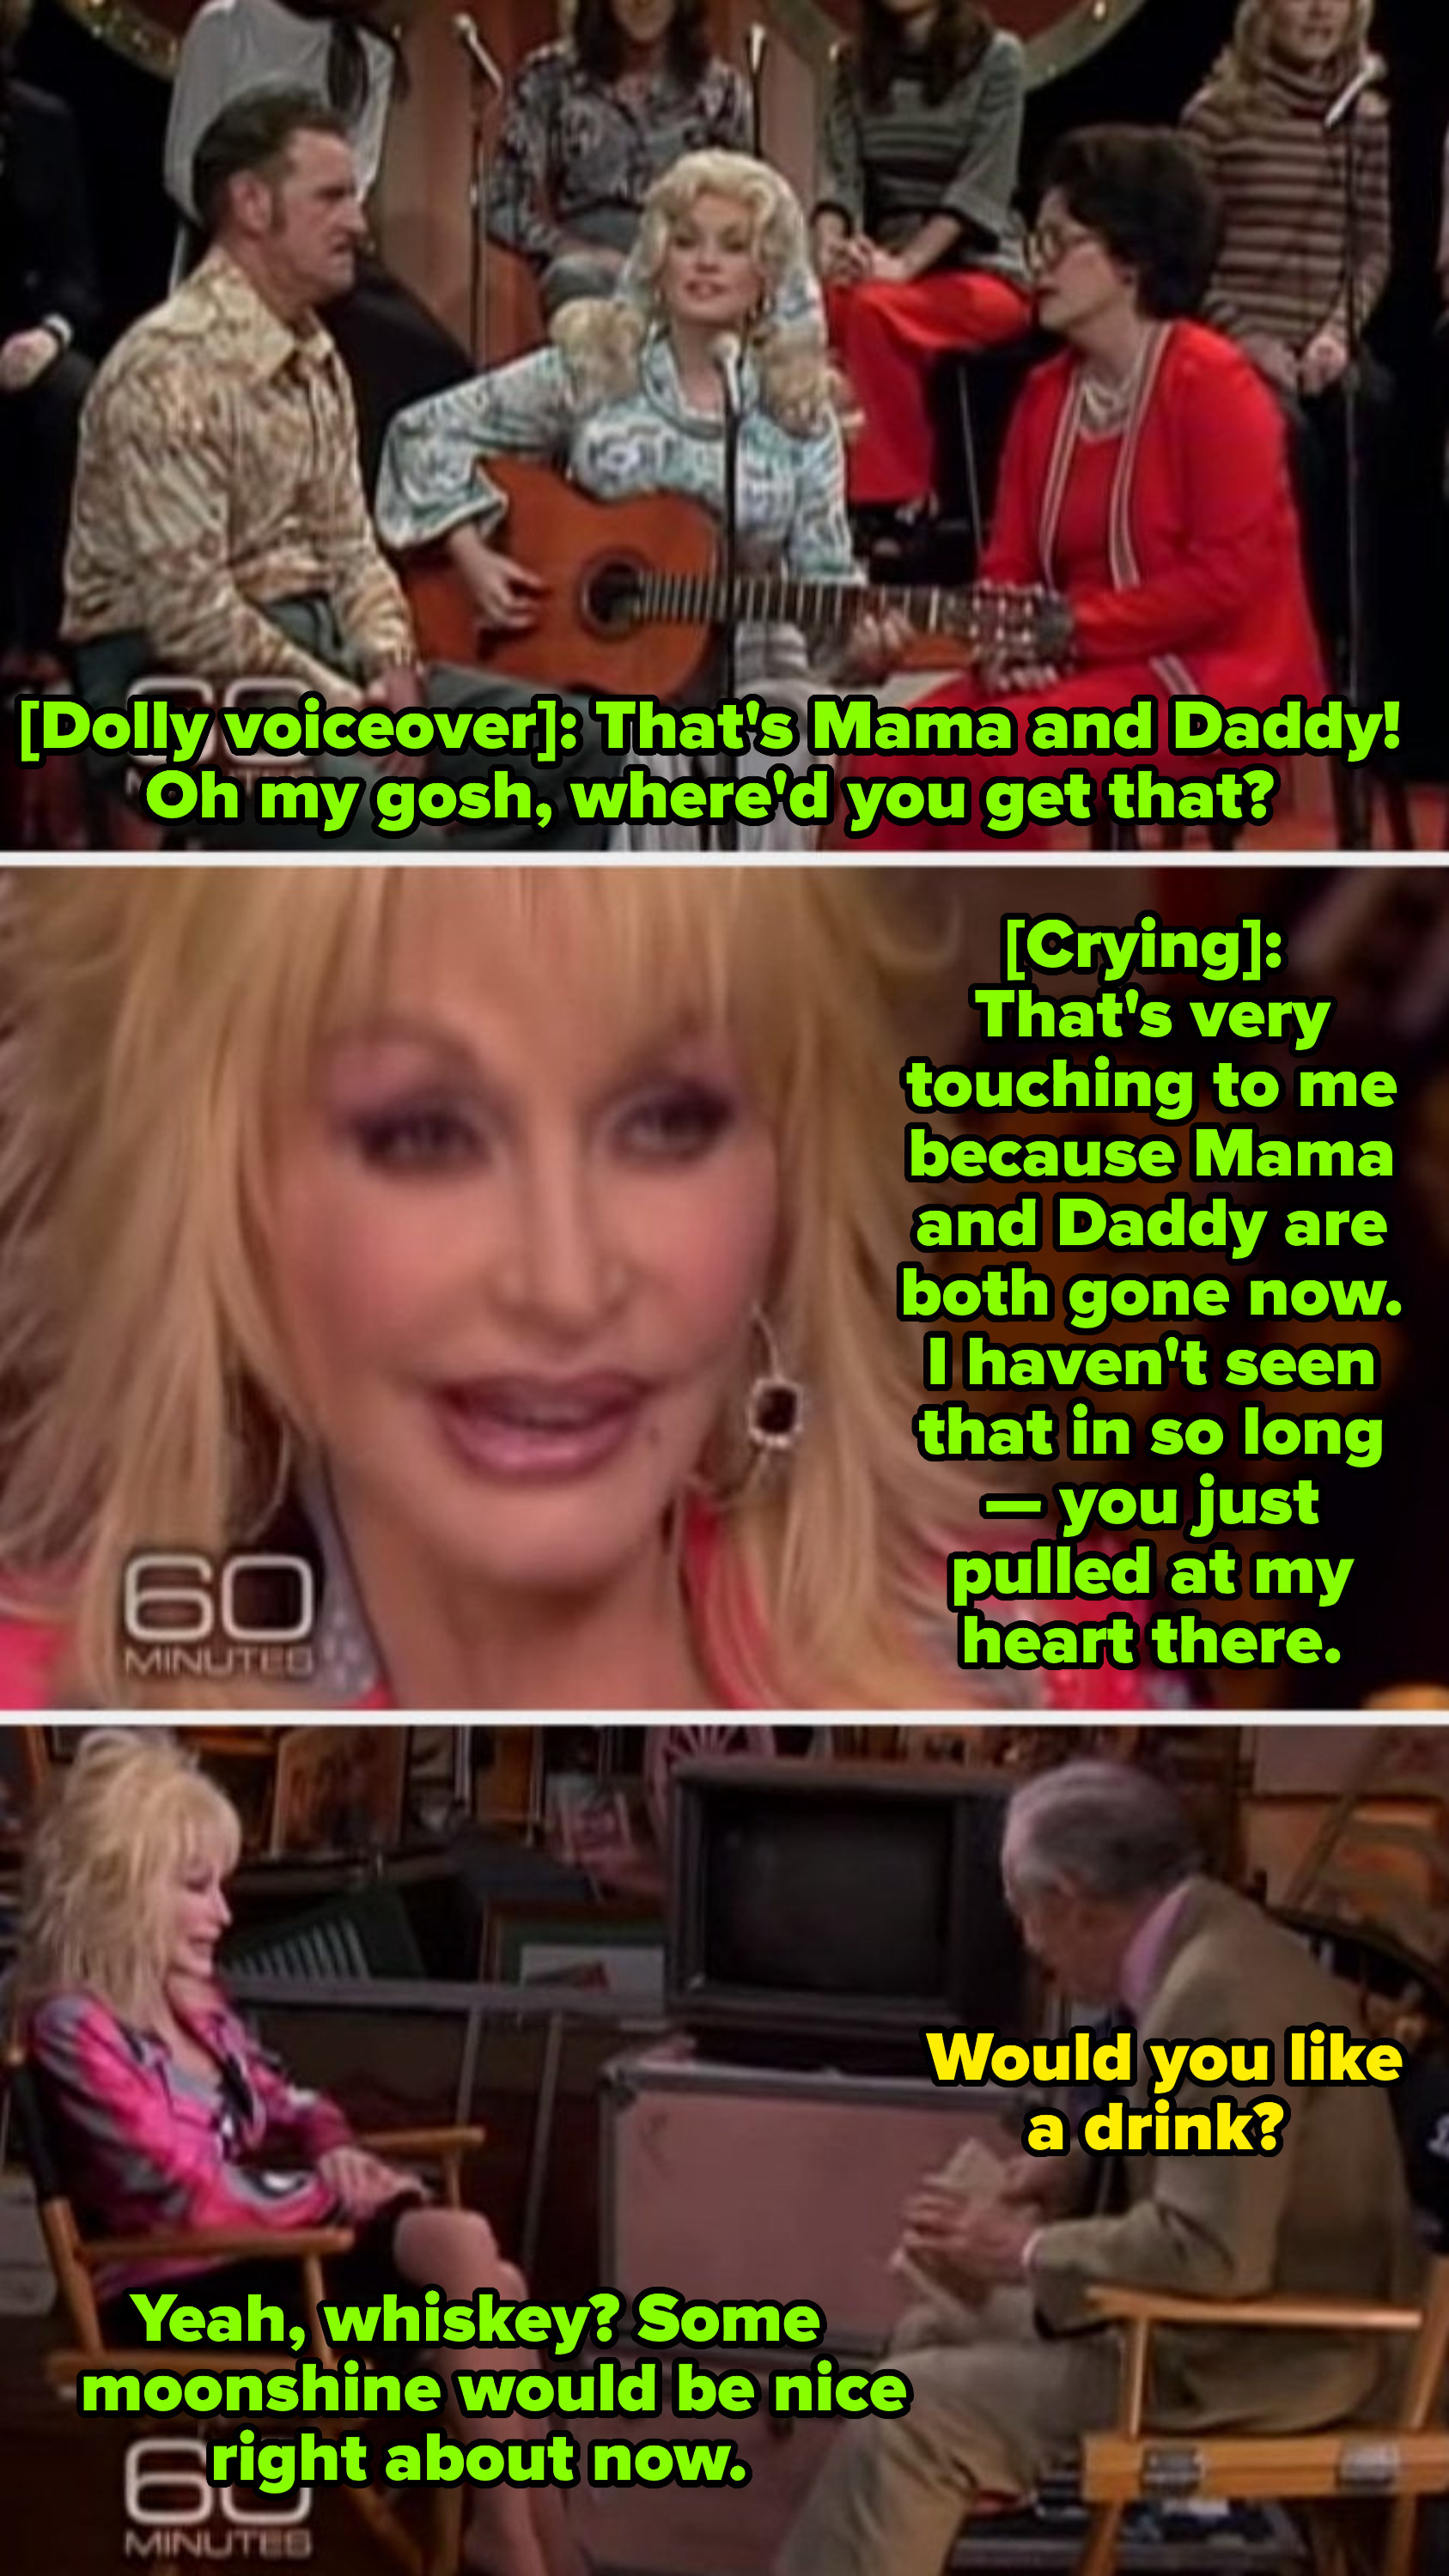 Dolly: &quot;That&#x27;s very touching to me because Mama and Daddy are gone now.&quot; Interviewer: &quot;Would you like a drink?&quot; Dolly: &quot;Yeah, whiskey? Some moonshine would be nice right about now&quot;